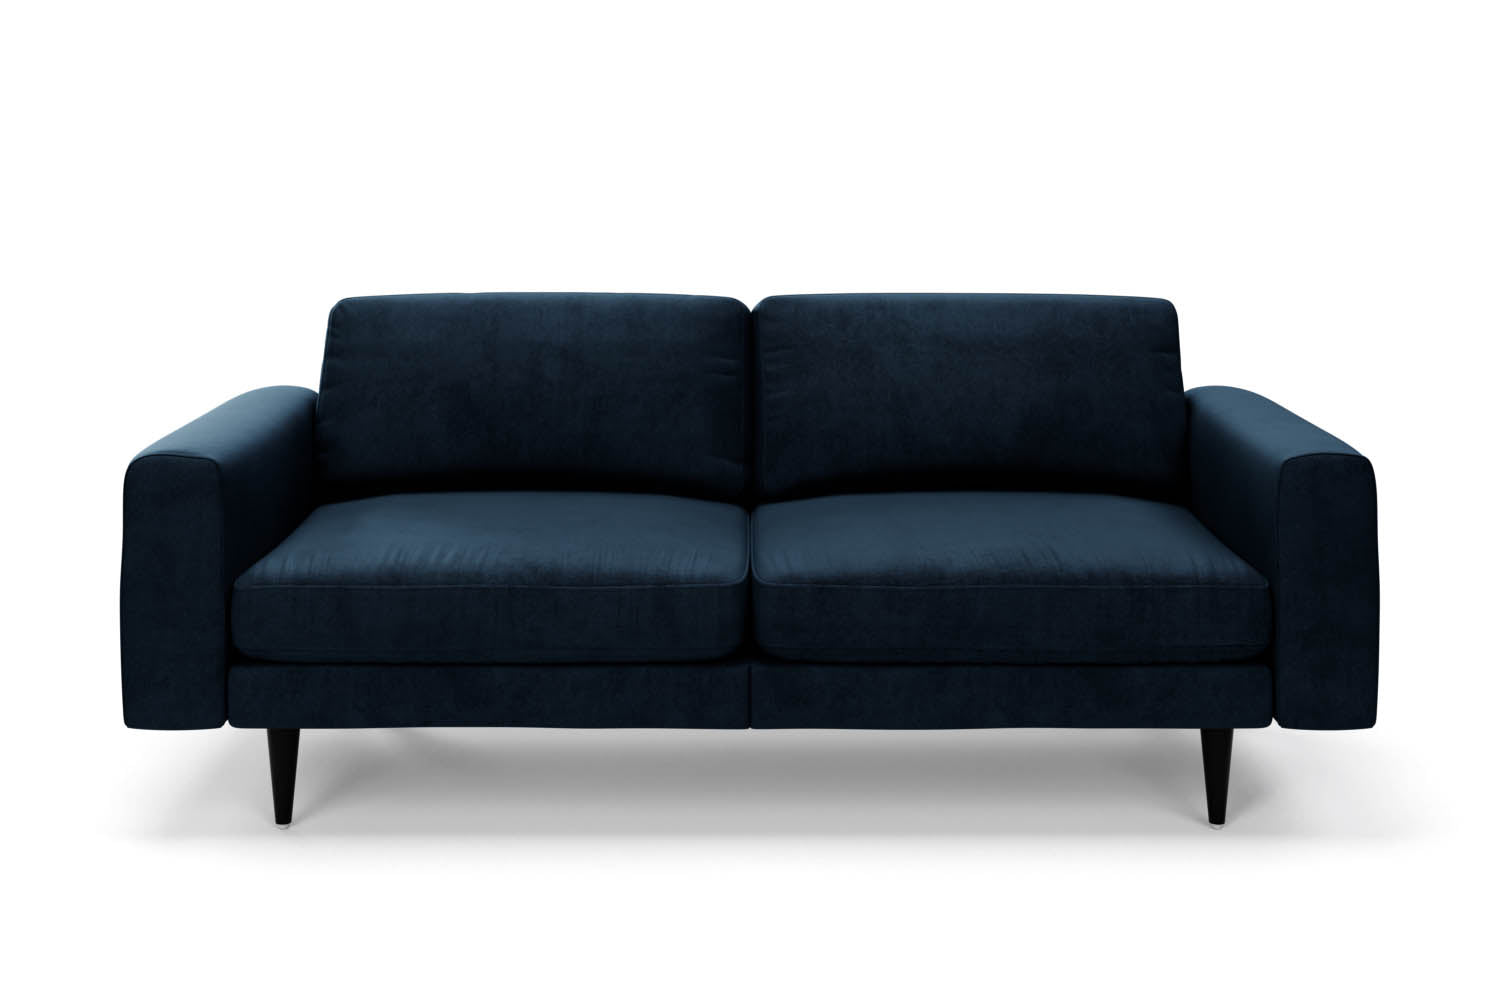 SNUG | The Big Chill 3 Seater Sofa in Deep Blue variant_40837174460464